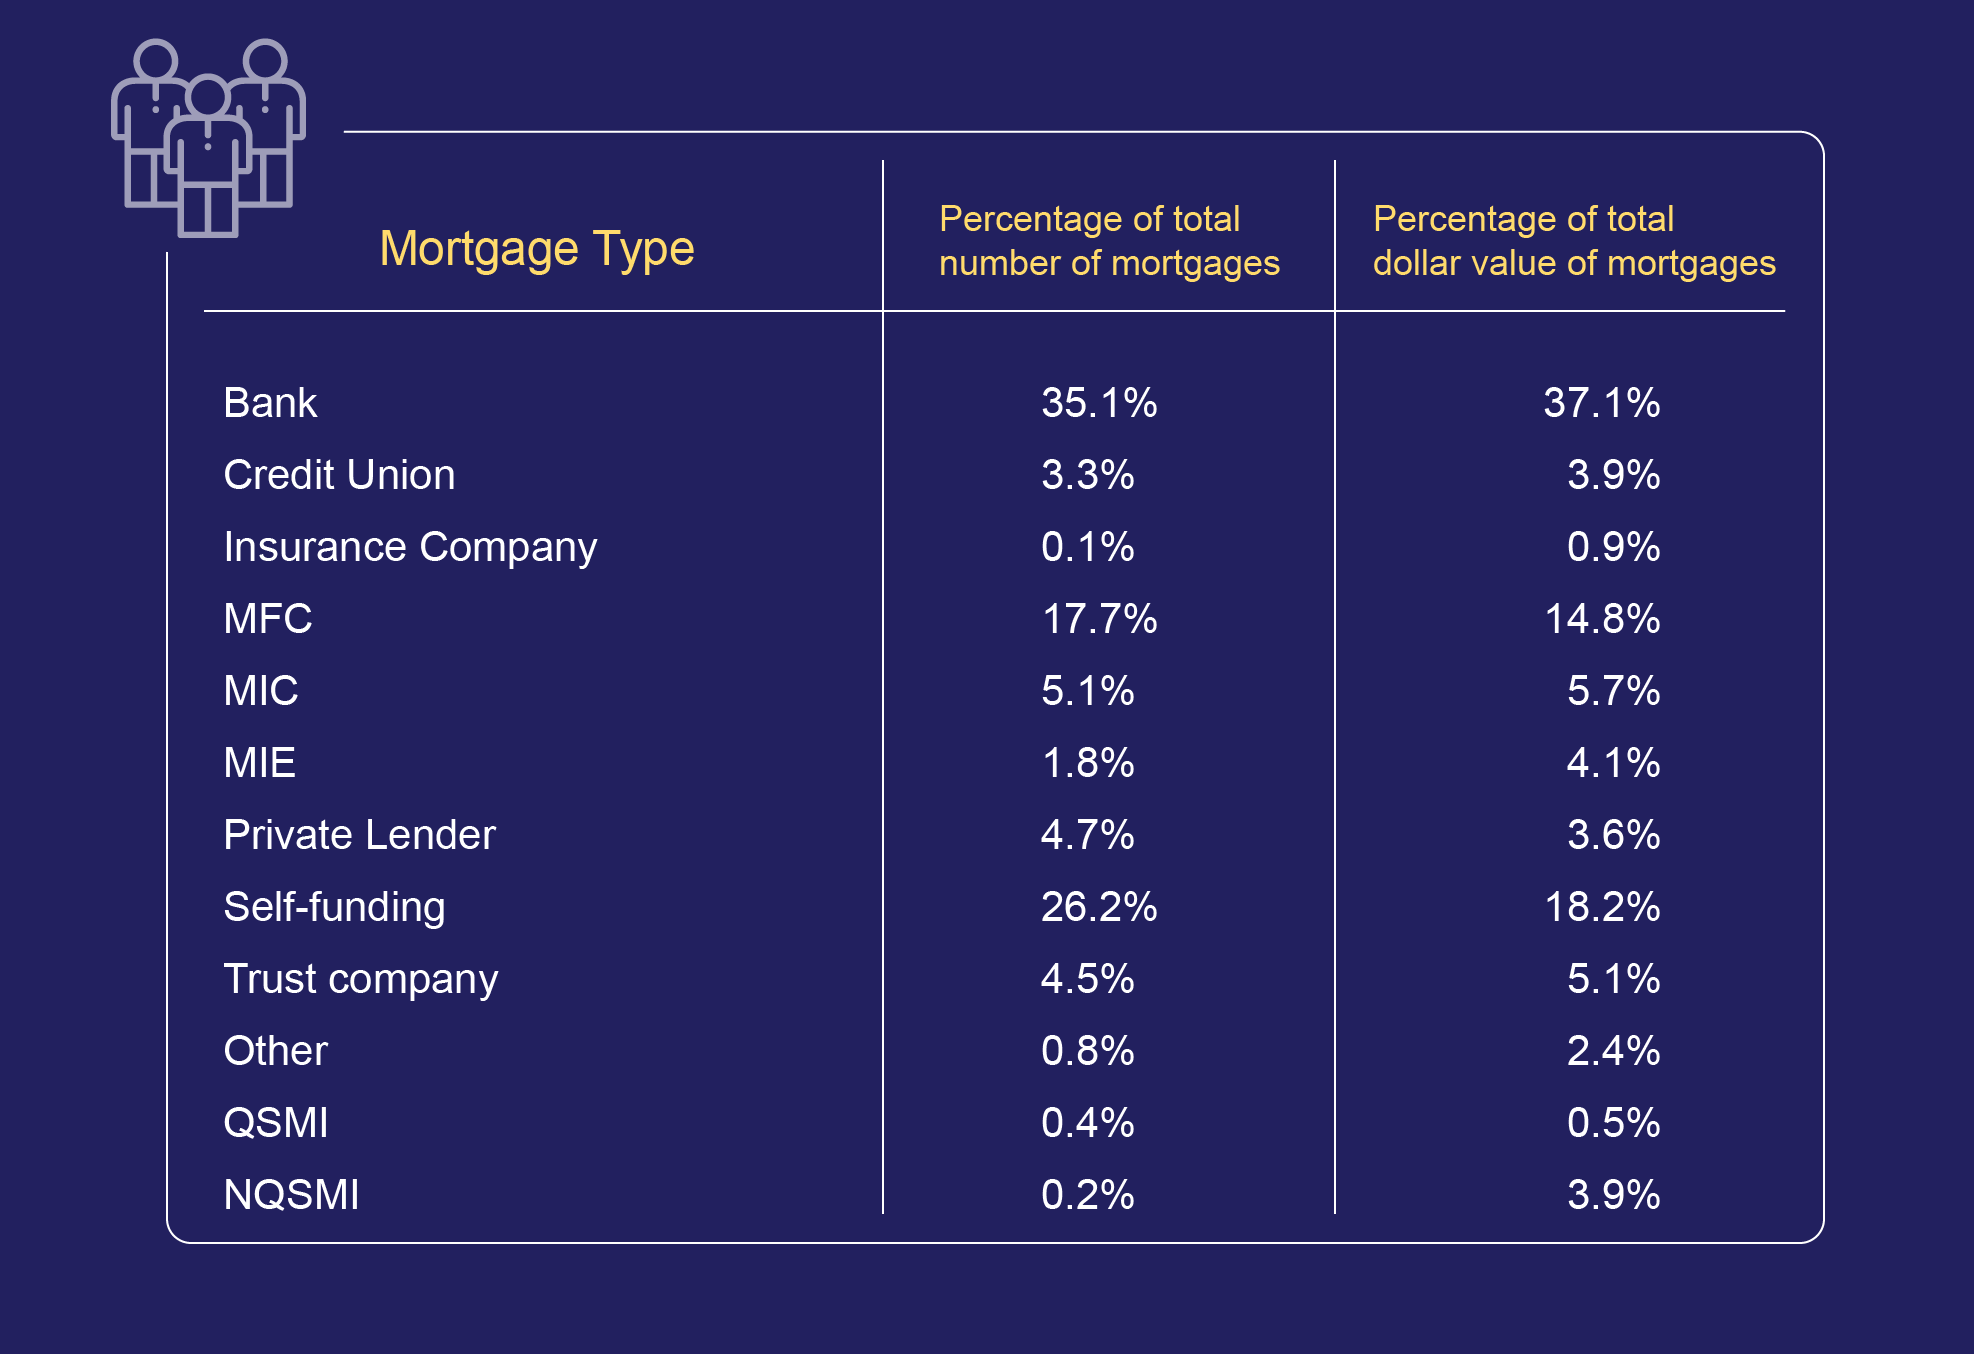 Mortgage type to total number/dollar value of mortgages